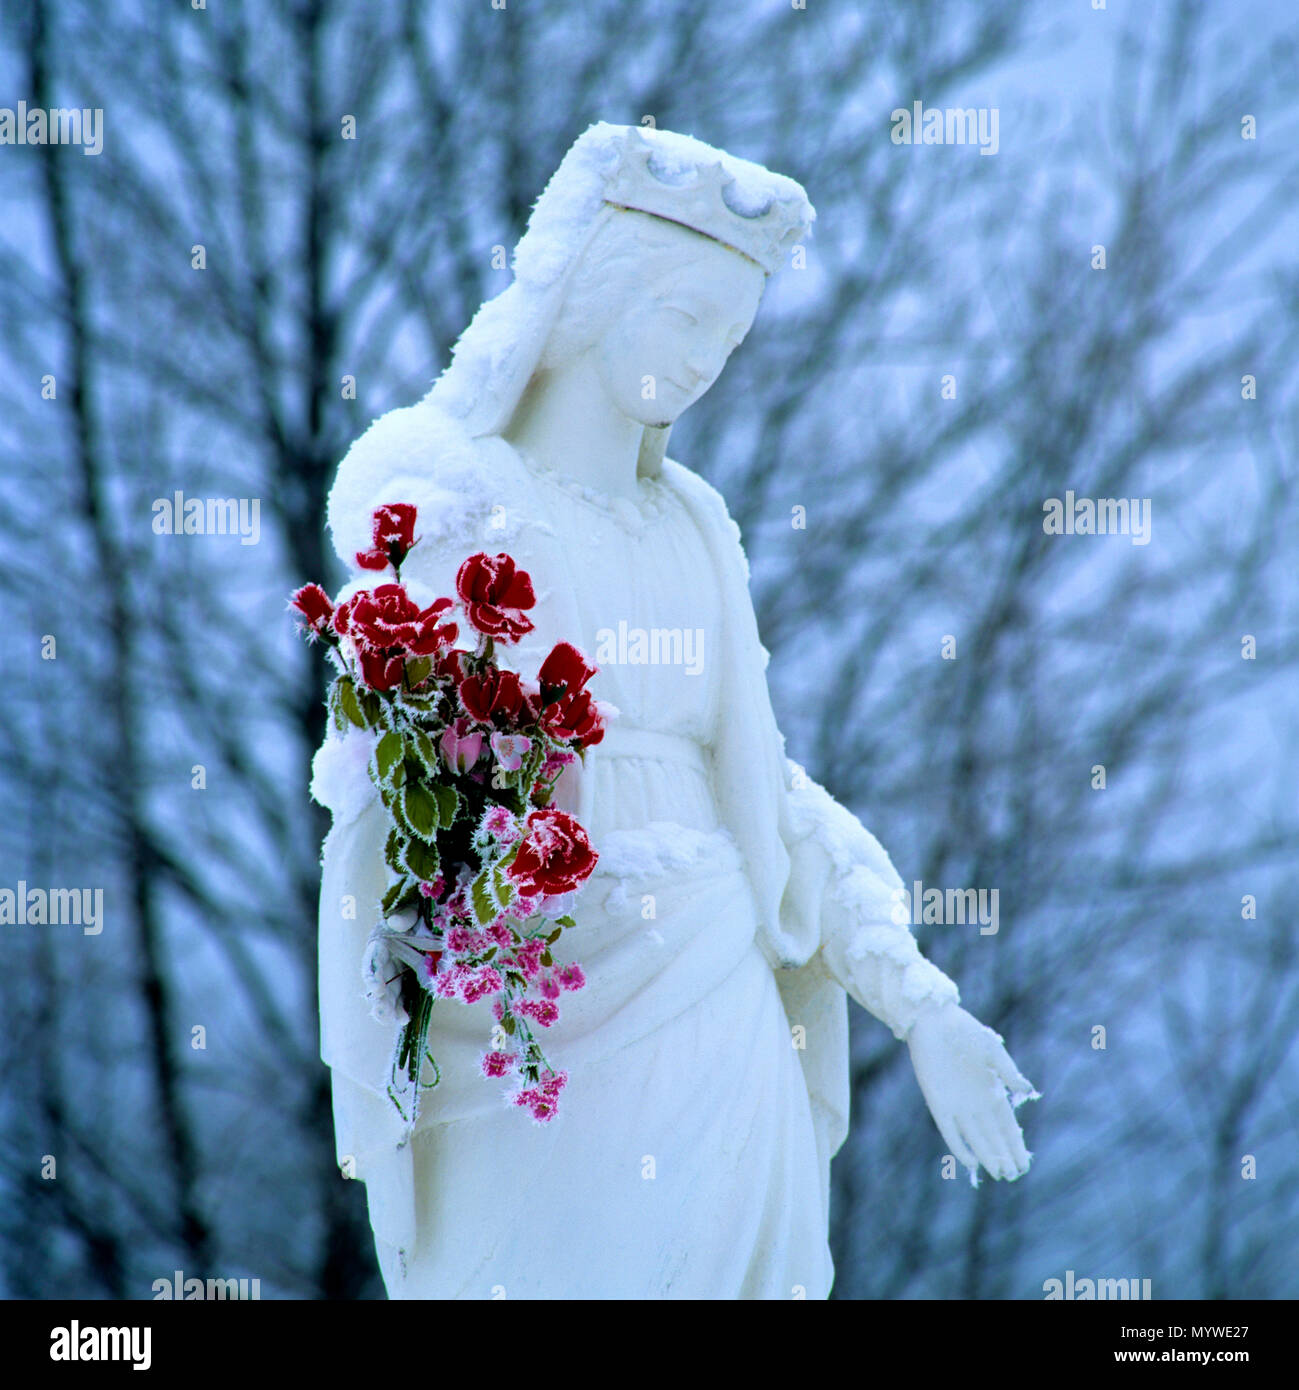 Statue of a queen in winter, Livradois Forez, Auvergne Rhone Alpes, France Stock Photo